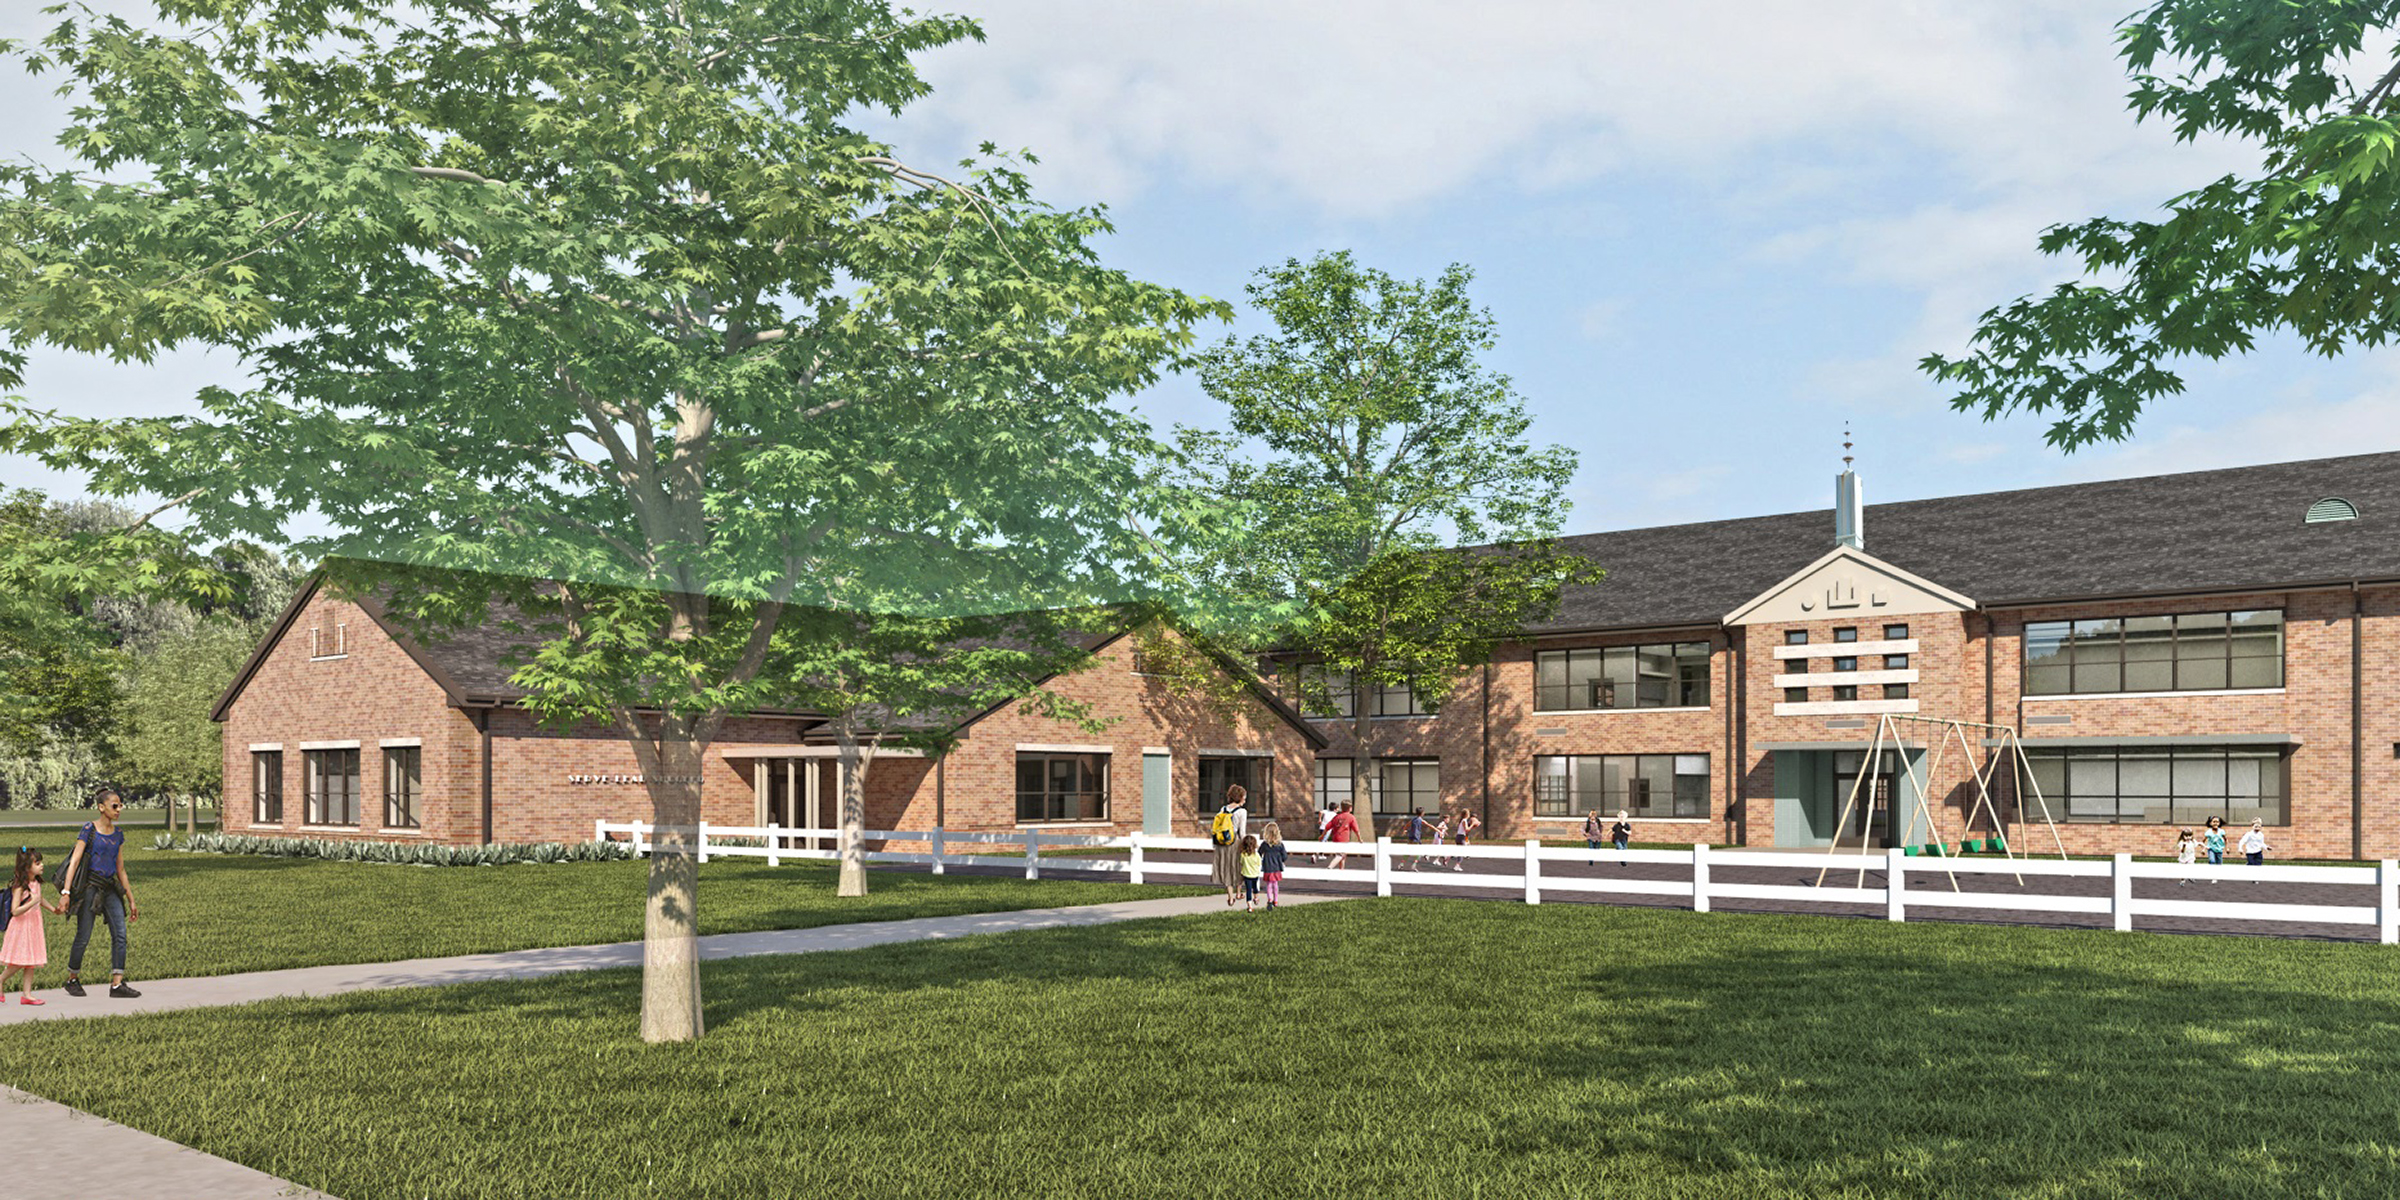 An exterior rendering of a new addition to the existing Tremont Elementary School building as it faces Tremont Road